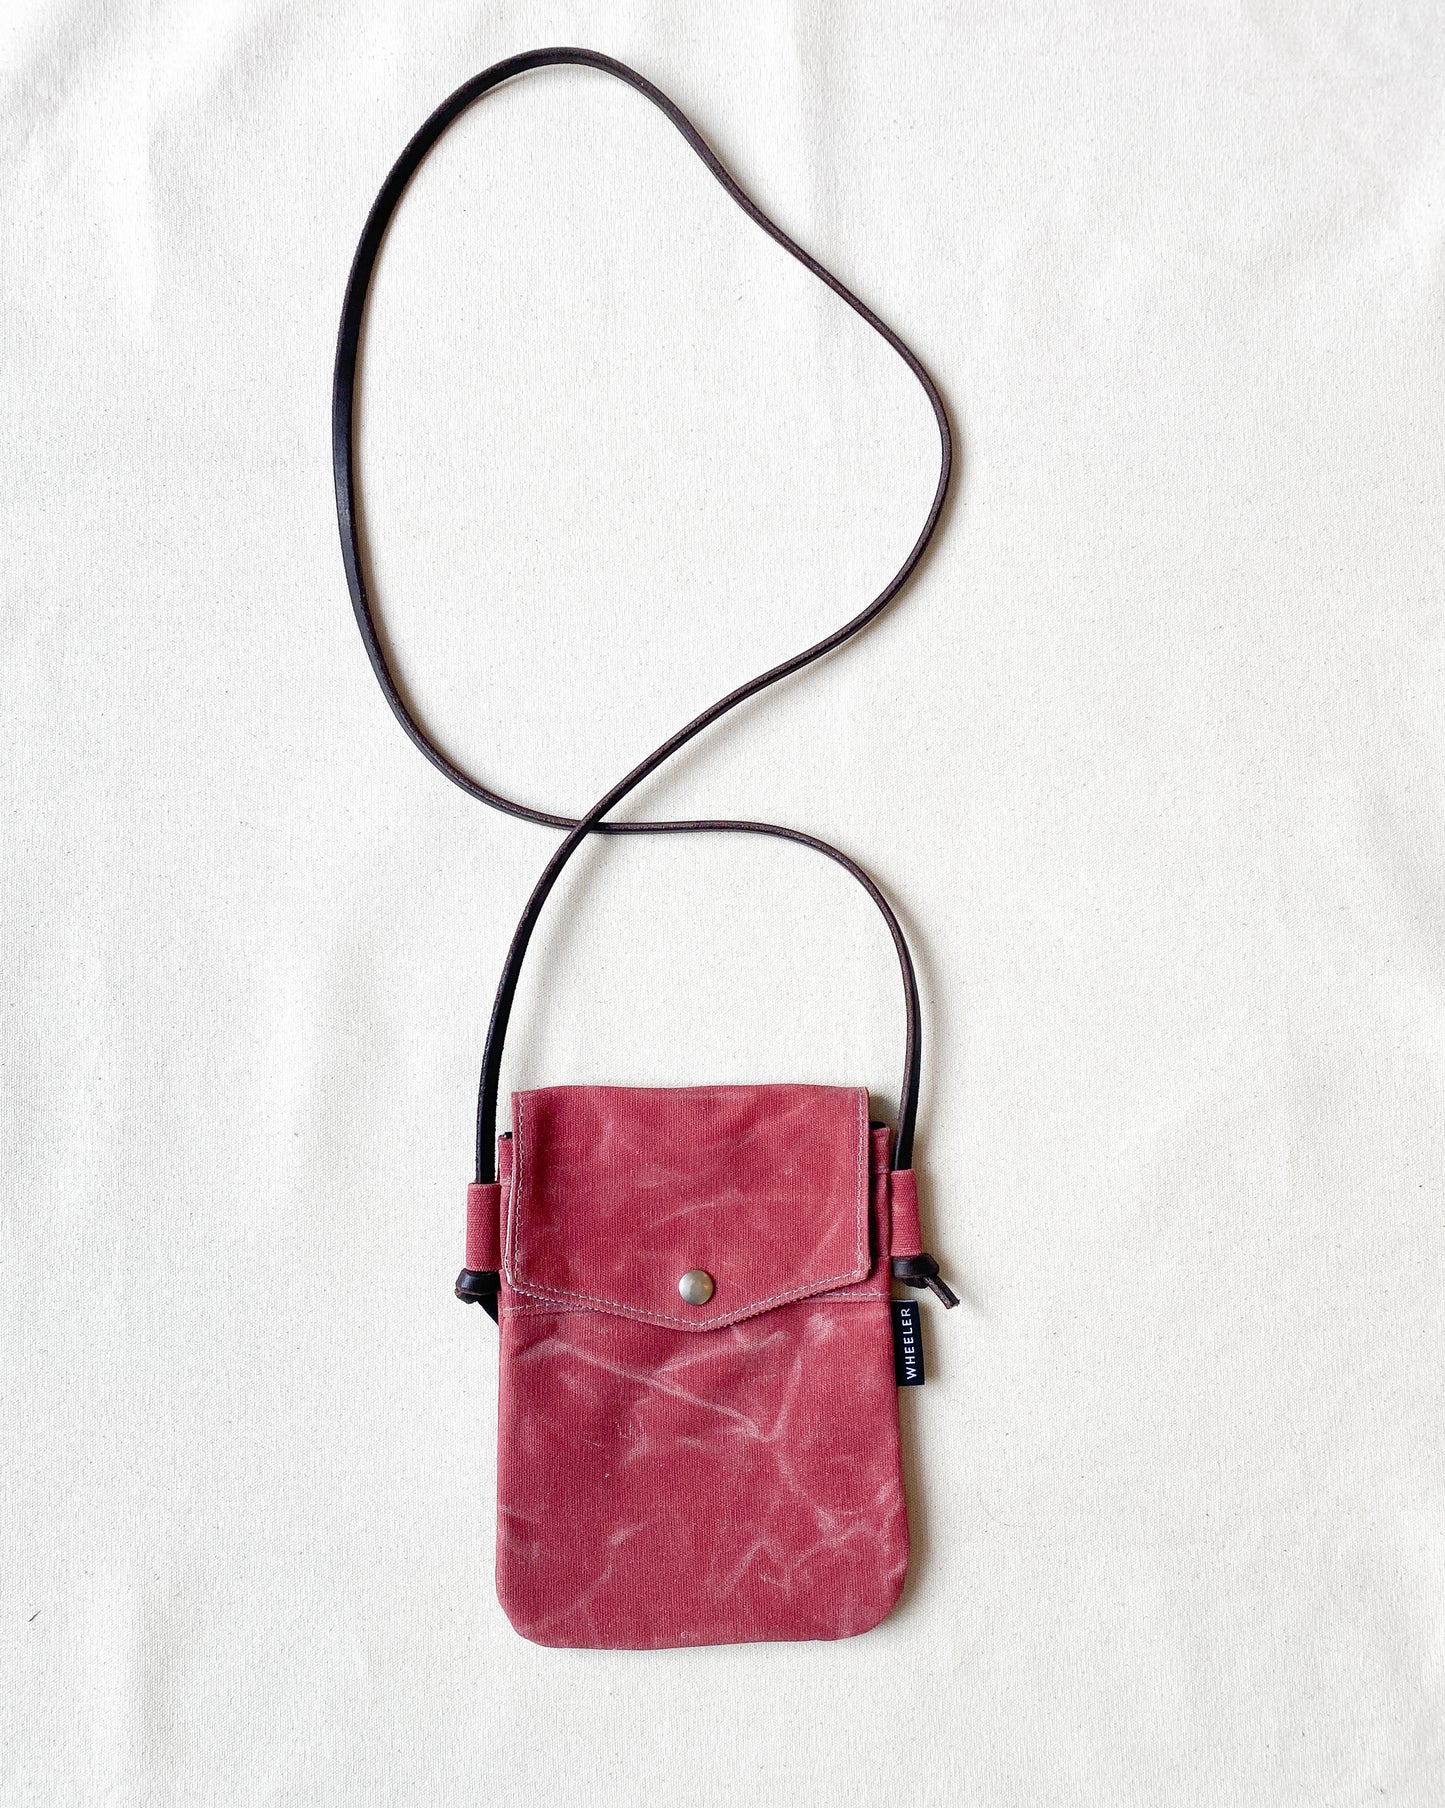 Waxed Canvas Simple Crossbody in all red.